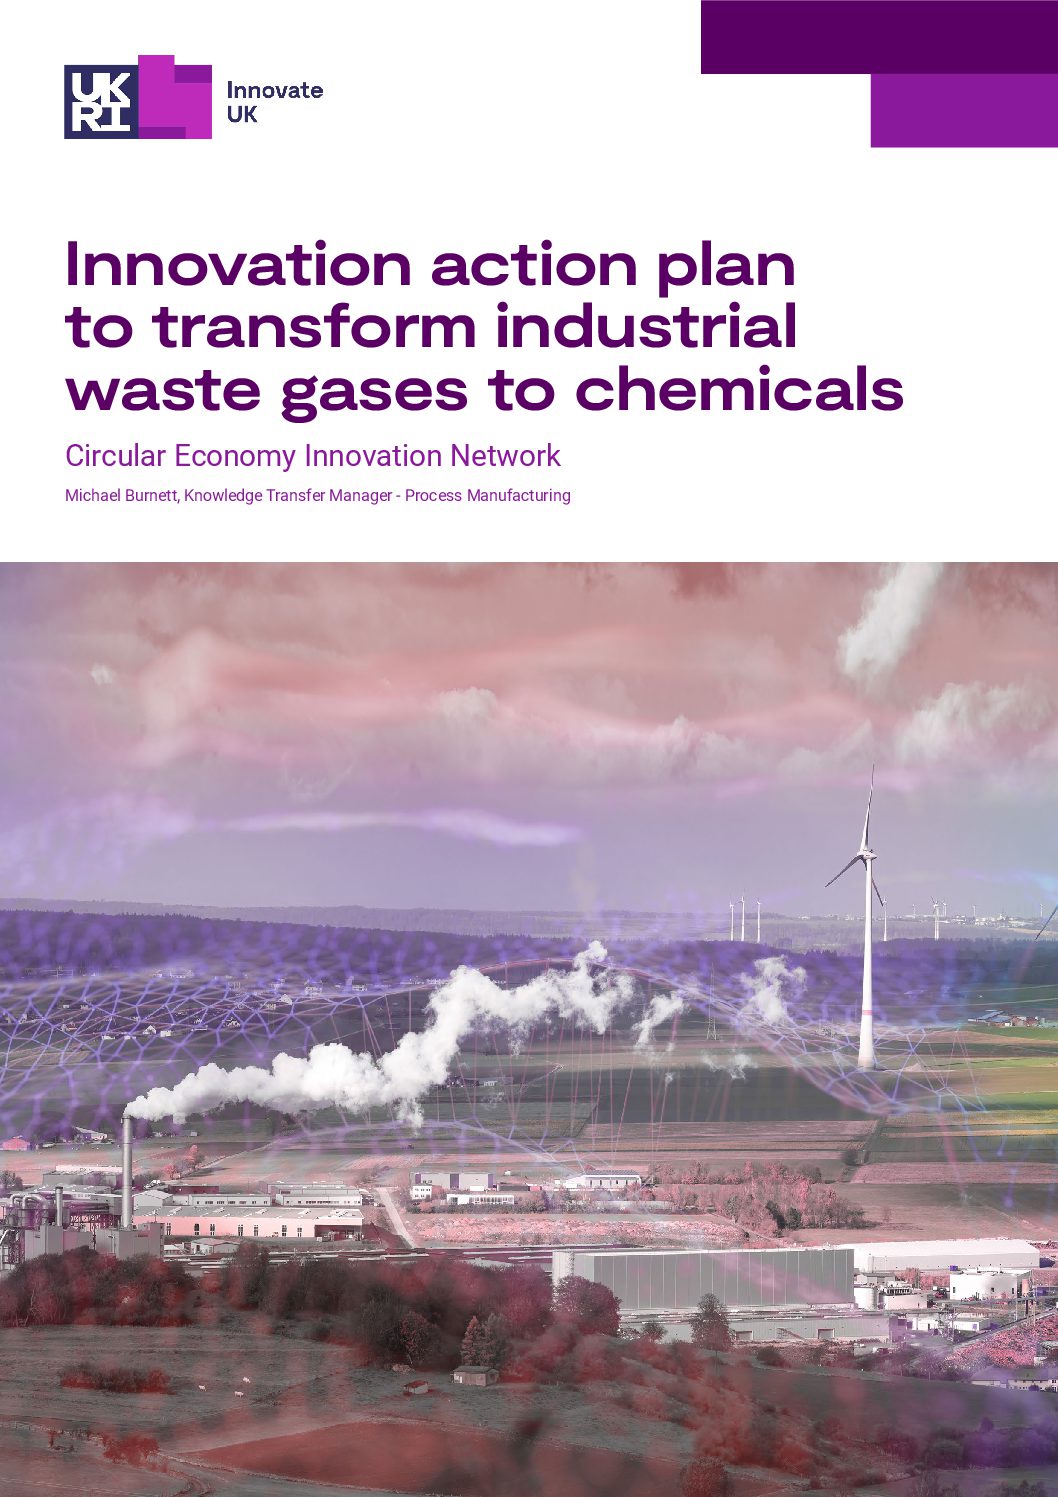 Transforming Industrial Waste Gases to Chemicals